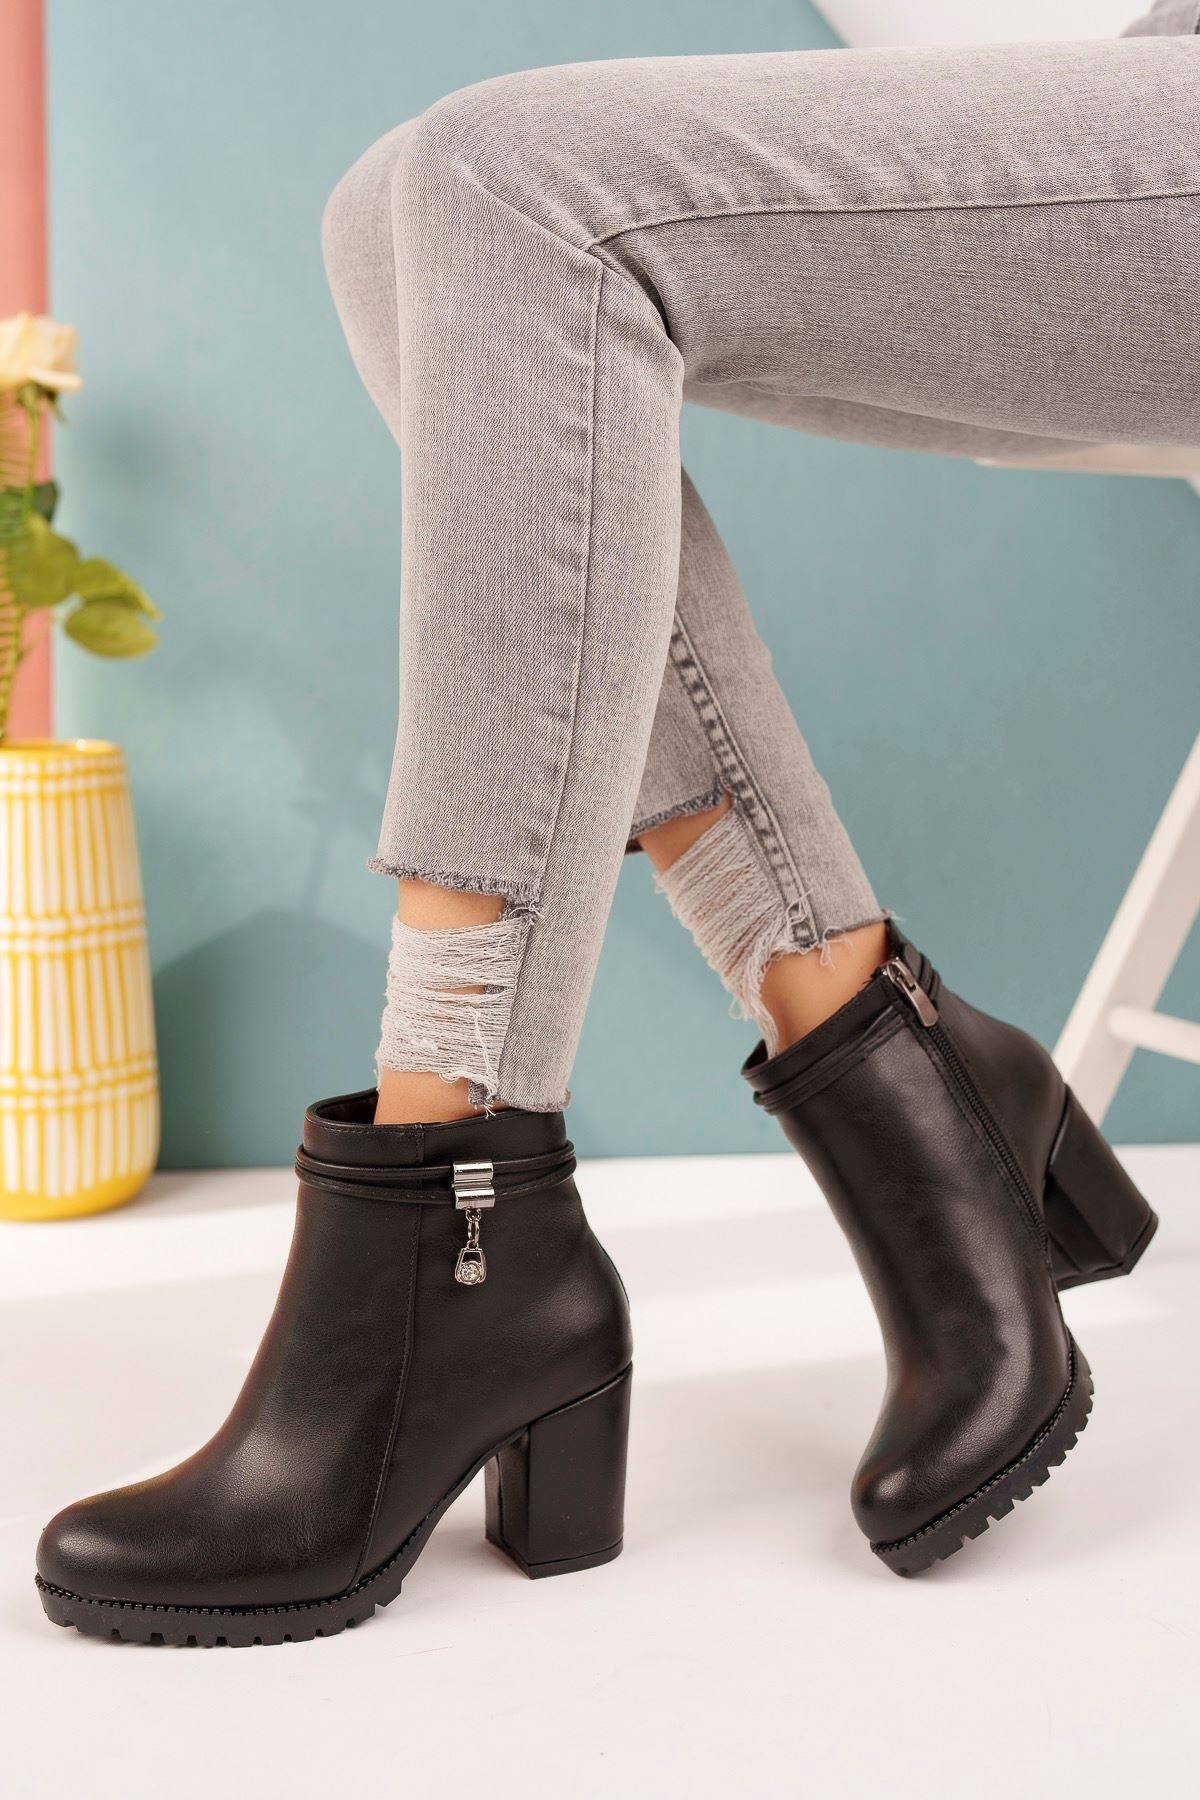 Black Skin Women's Boots with Single Stone